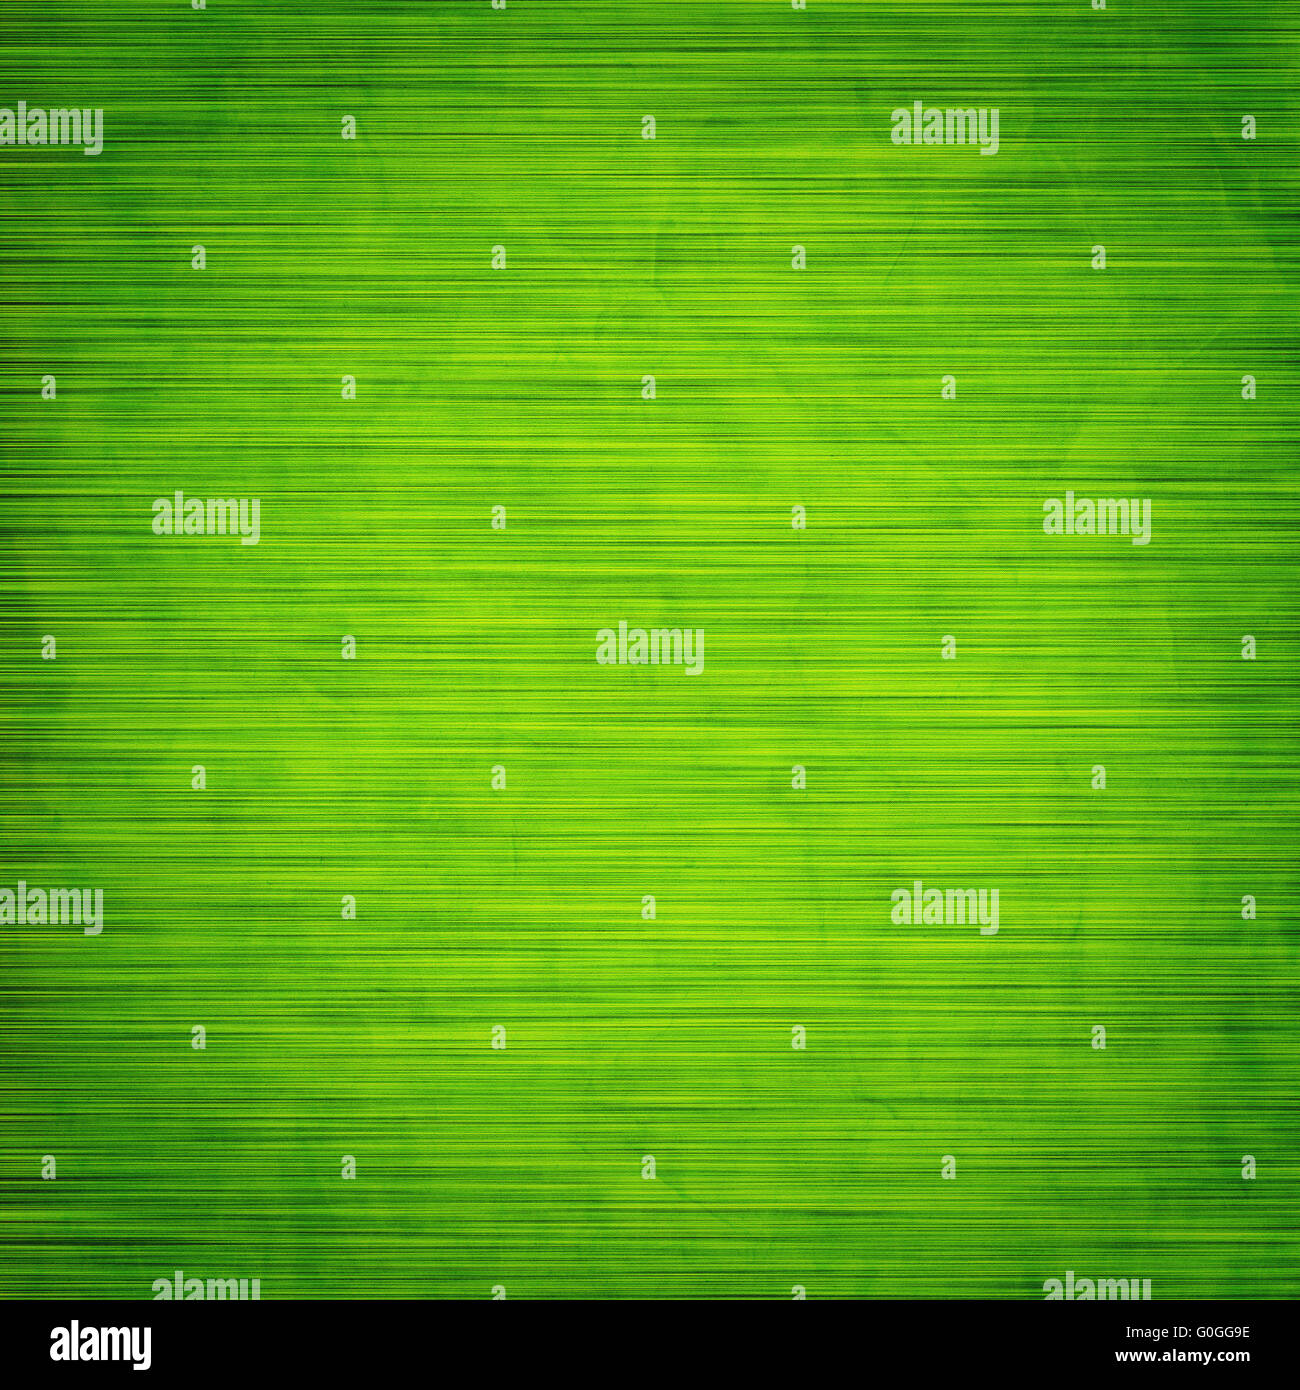 Elegant green abstract background, pattern, texture. Stock Photo